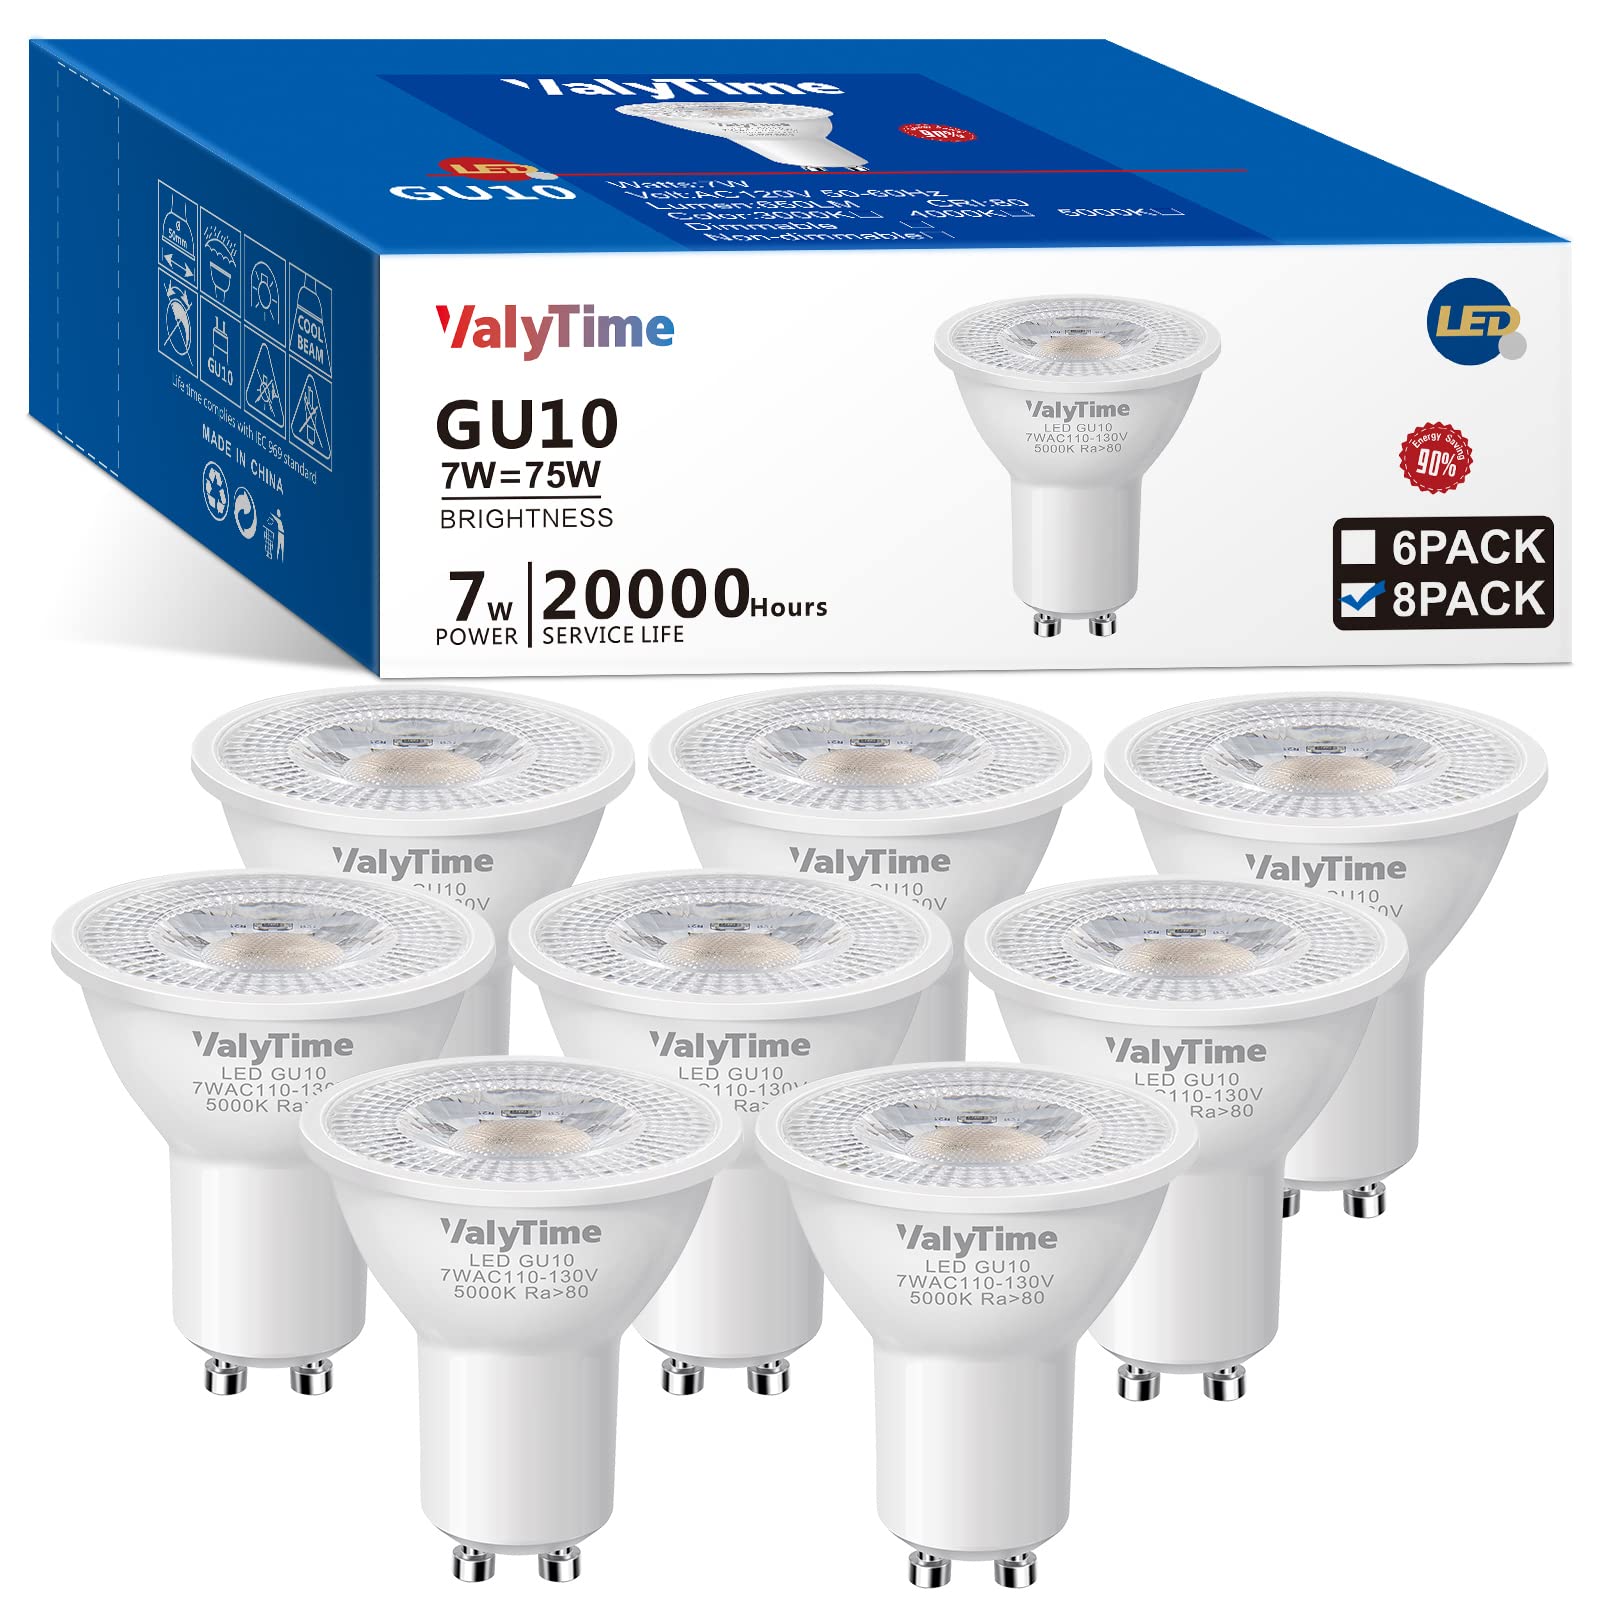 Valytime gU10 LED Light Bulbs 7W (50W -60W-75W Equivalent) gU10 Shape Halogen Replacement Bulb 38A 120V 650Lm Non-dimmable for T